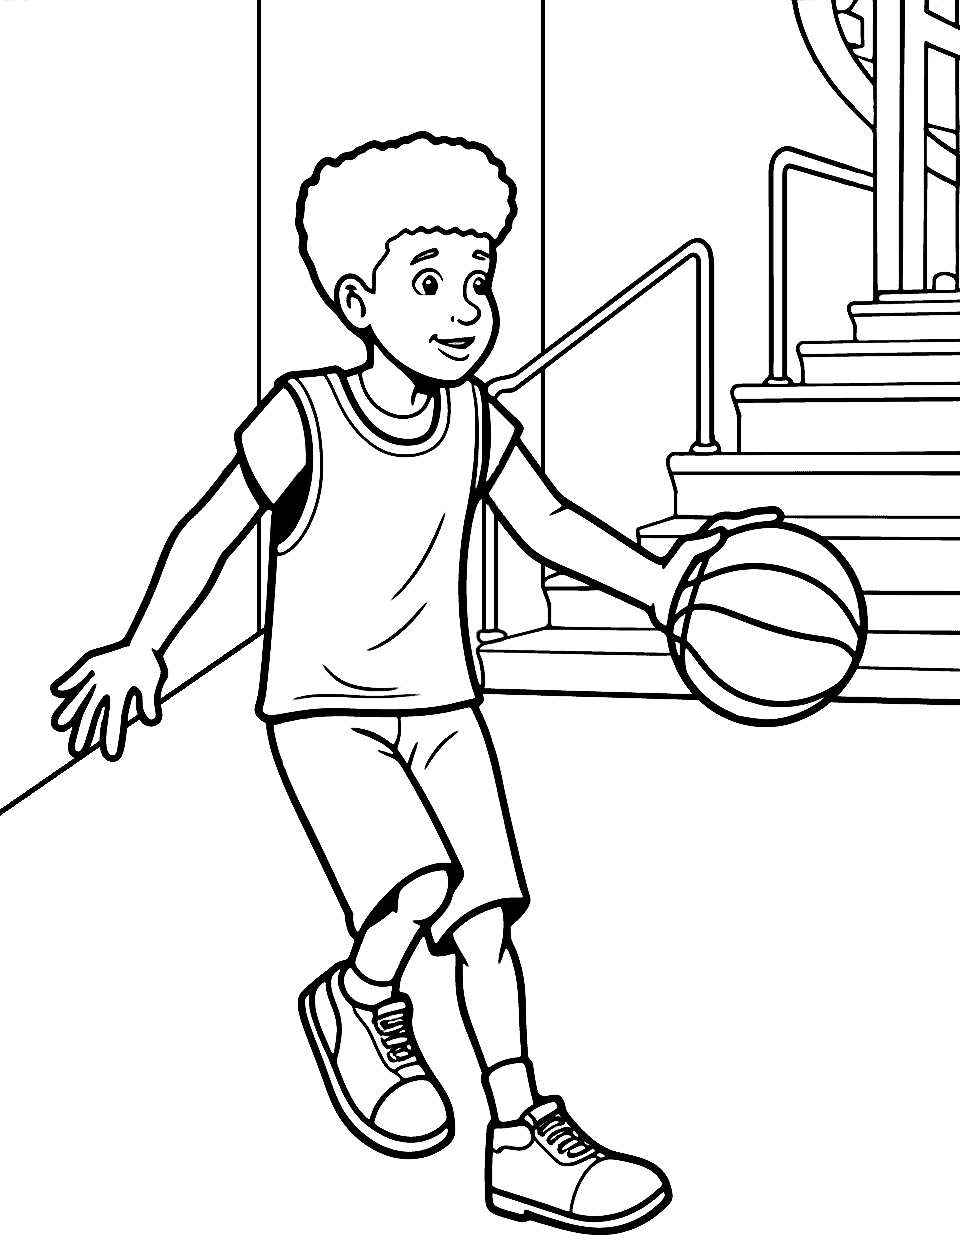 Underground Subway Game Basketball Coloring Page - A teenager playing basketball near the stairs of a subway station.